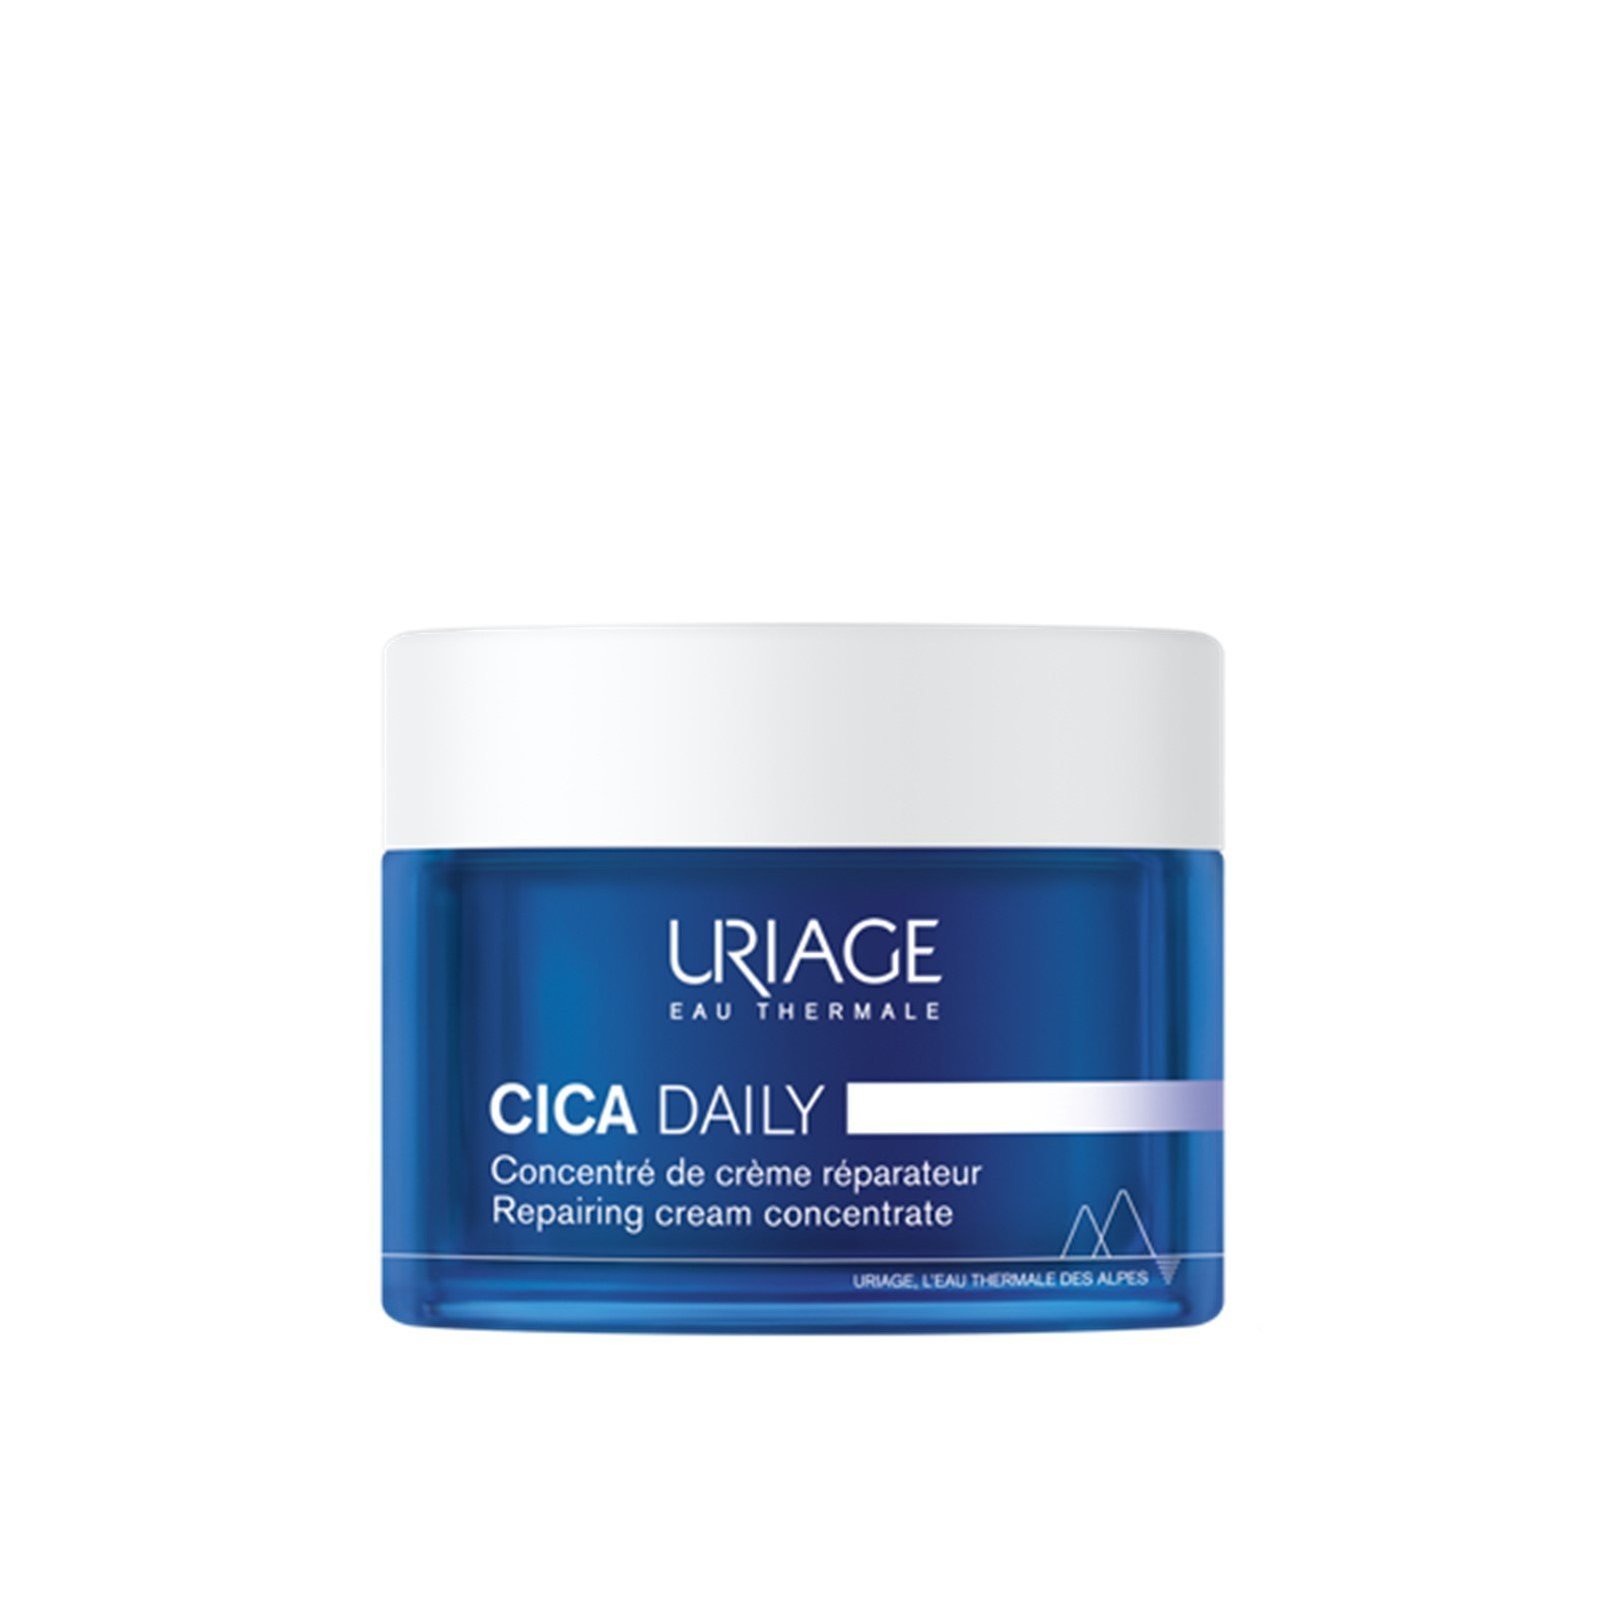 Uriage CICA Daily Repairing Cream Concentrate 50ml